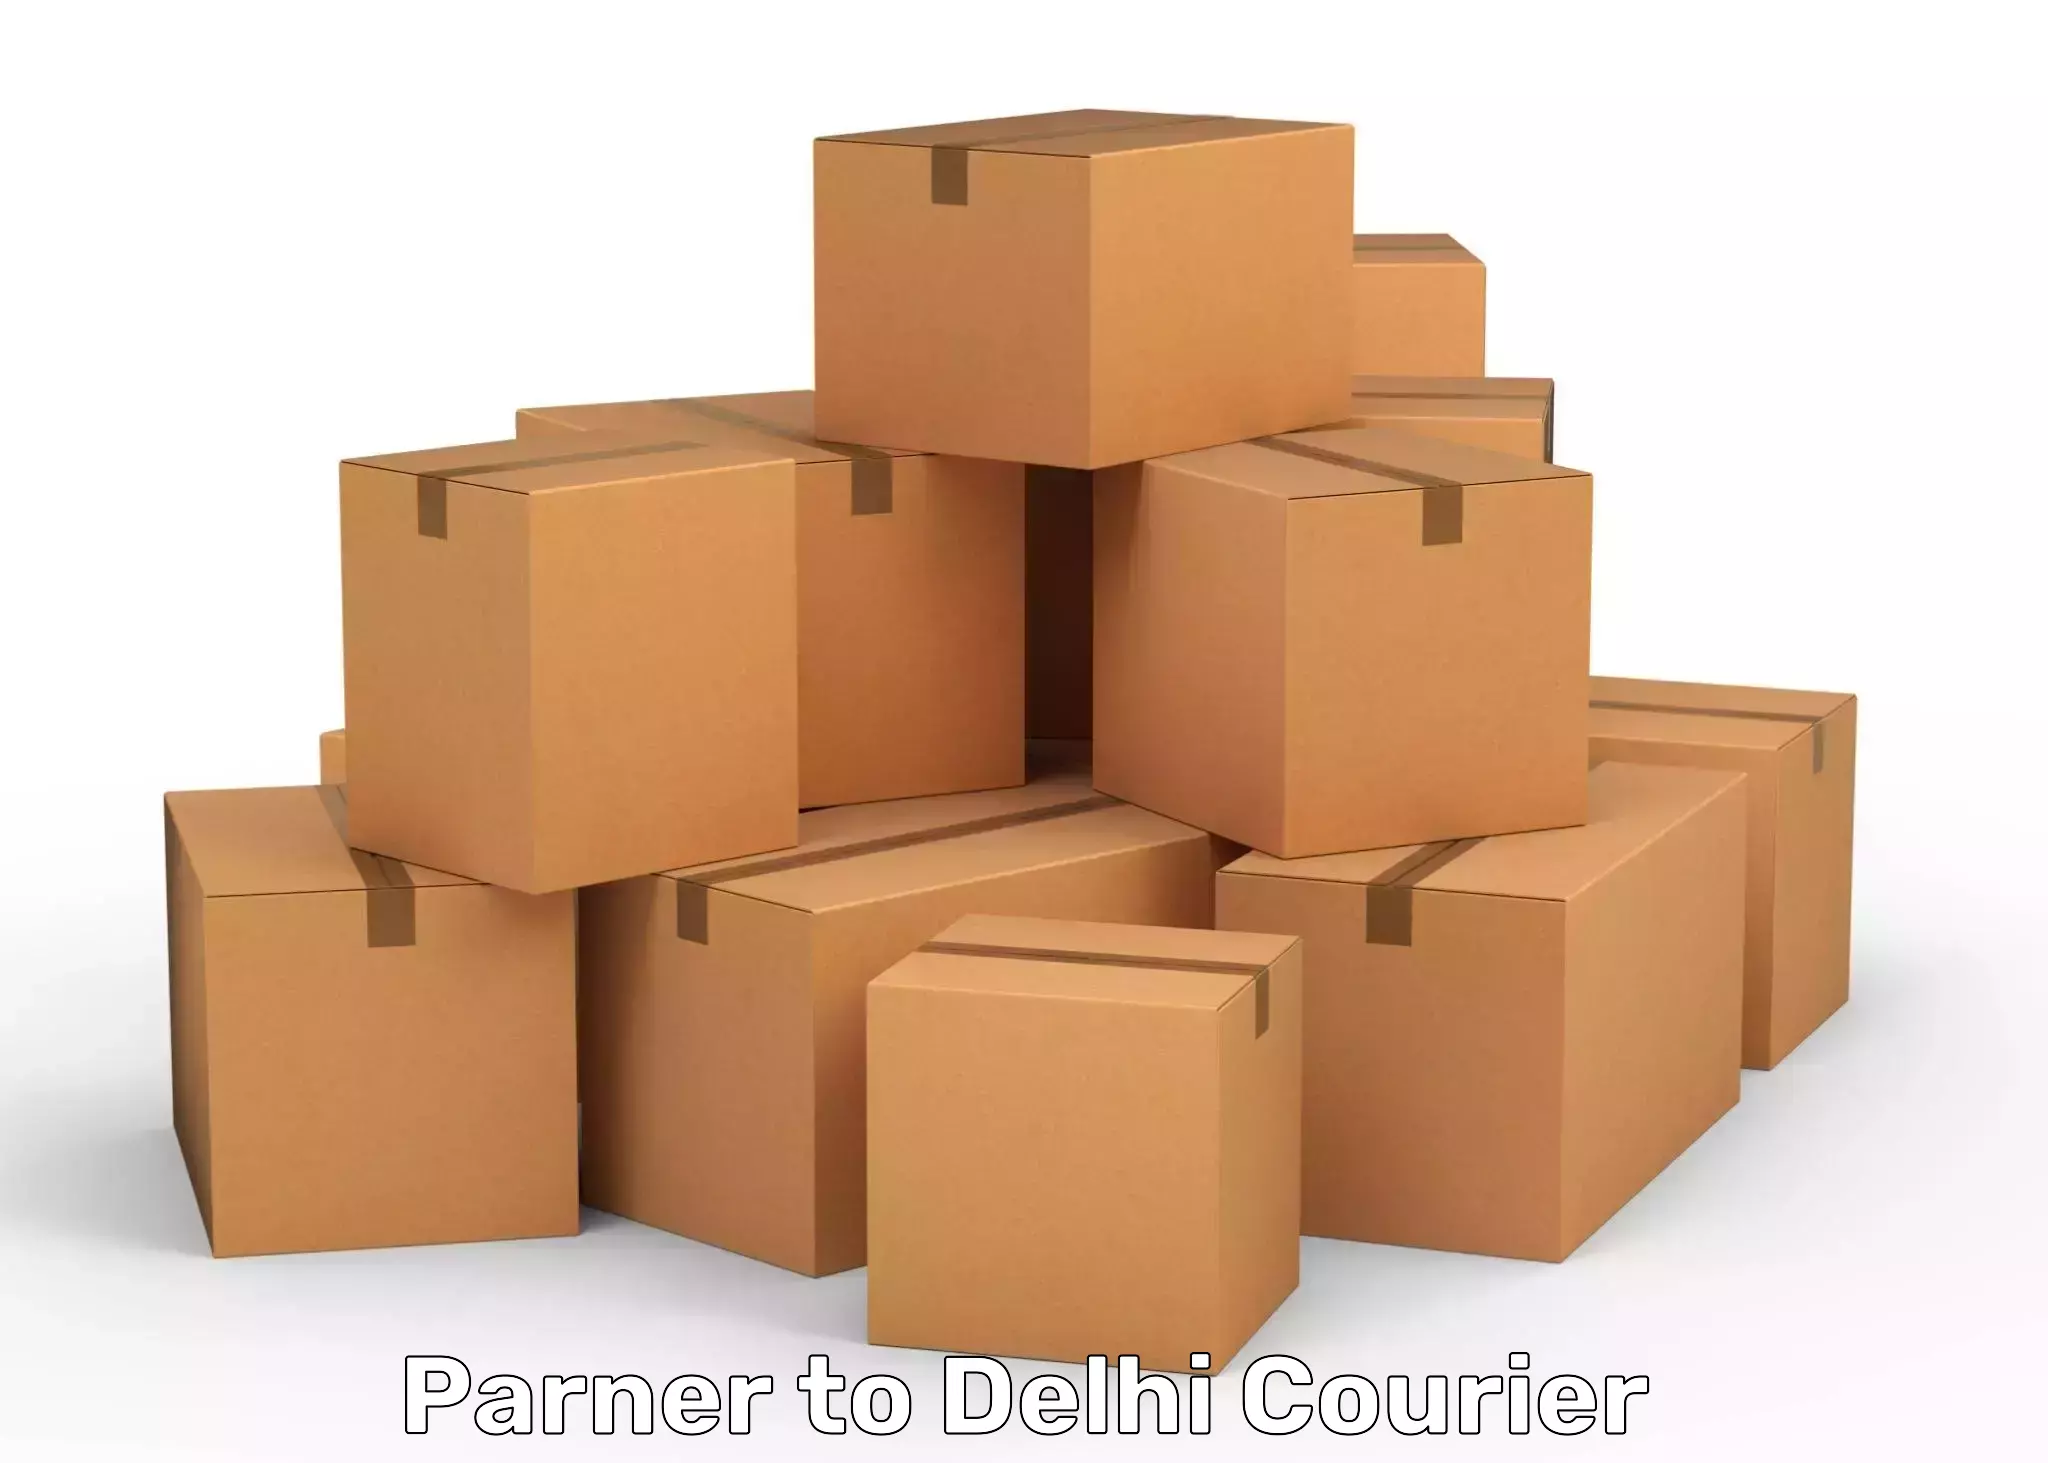 Global freight services Parner to Indraprastha